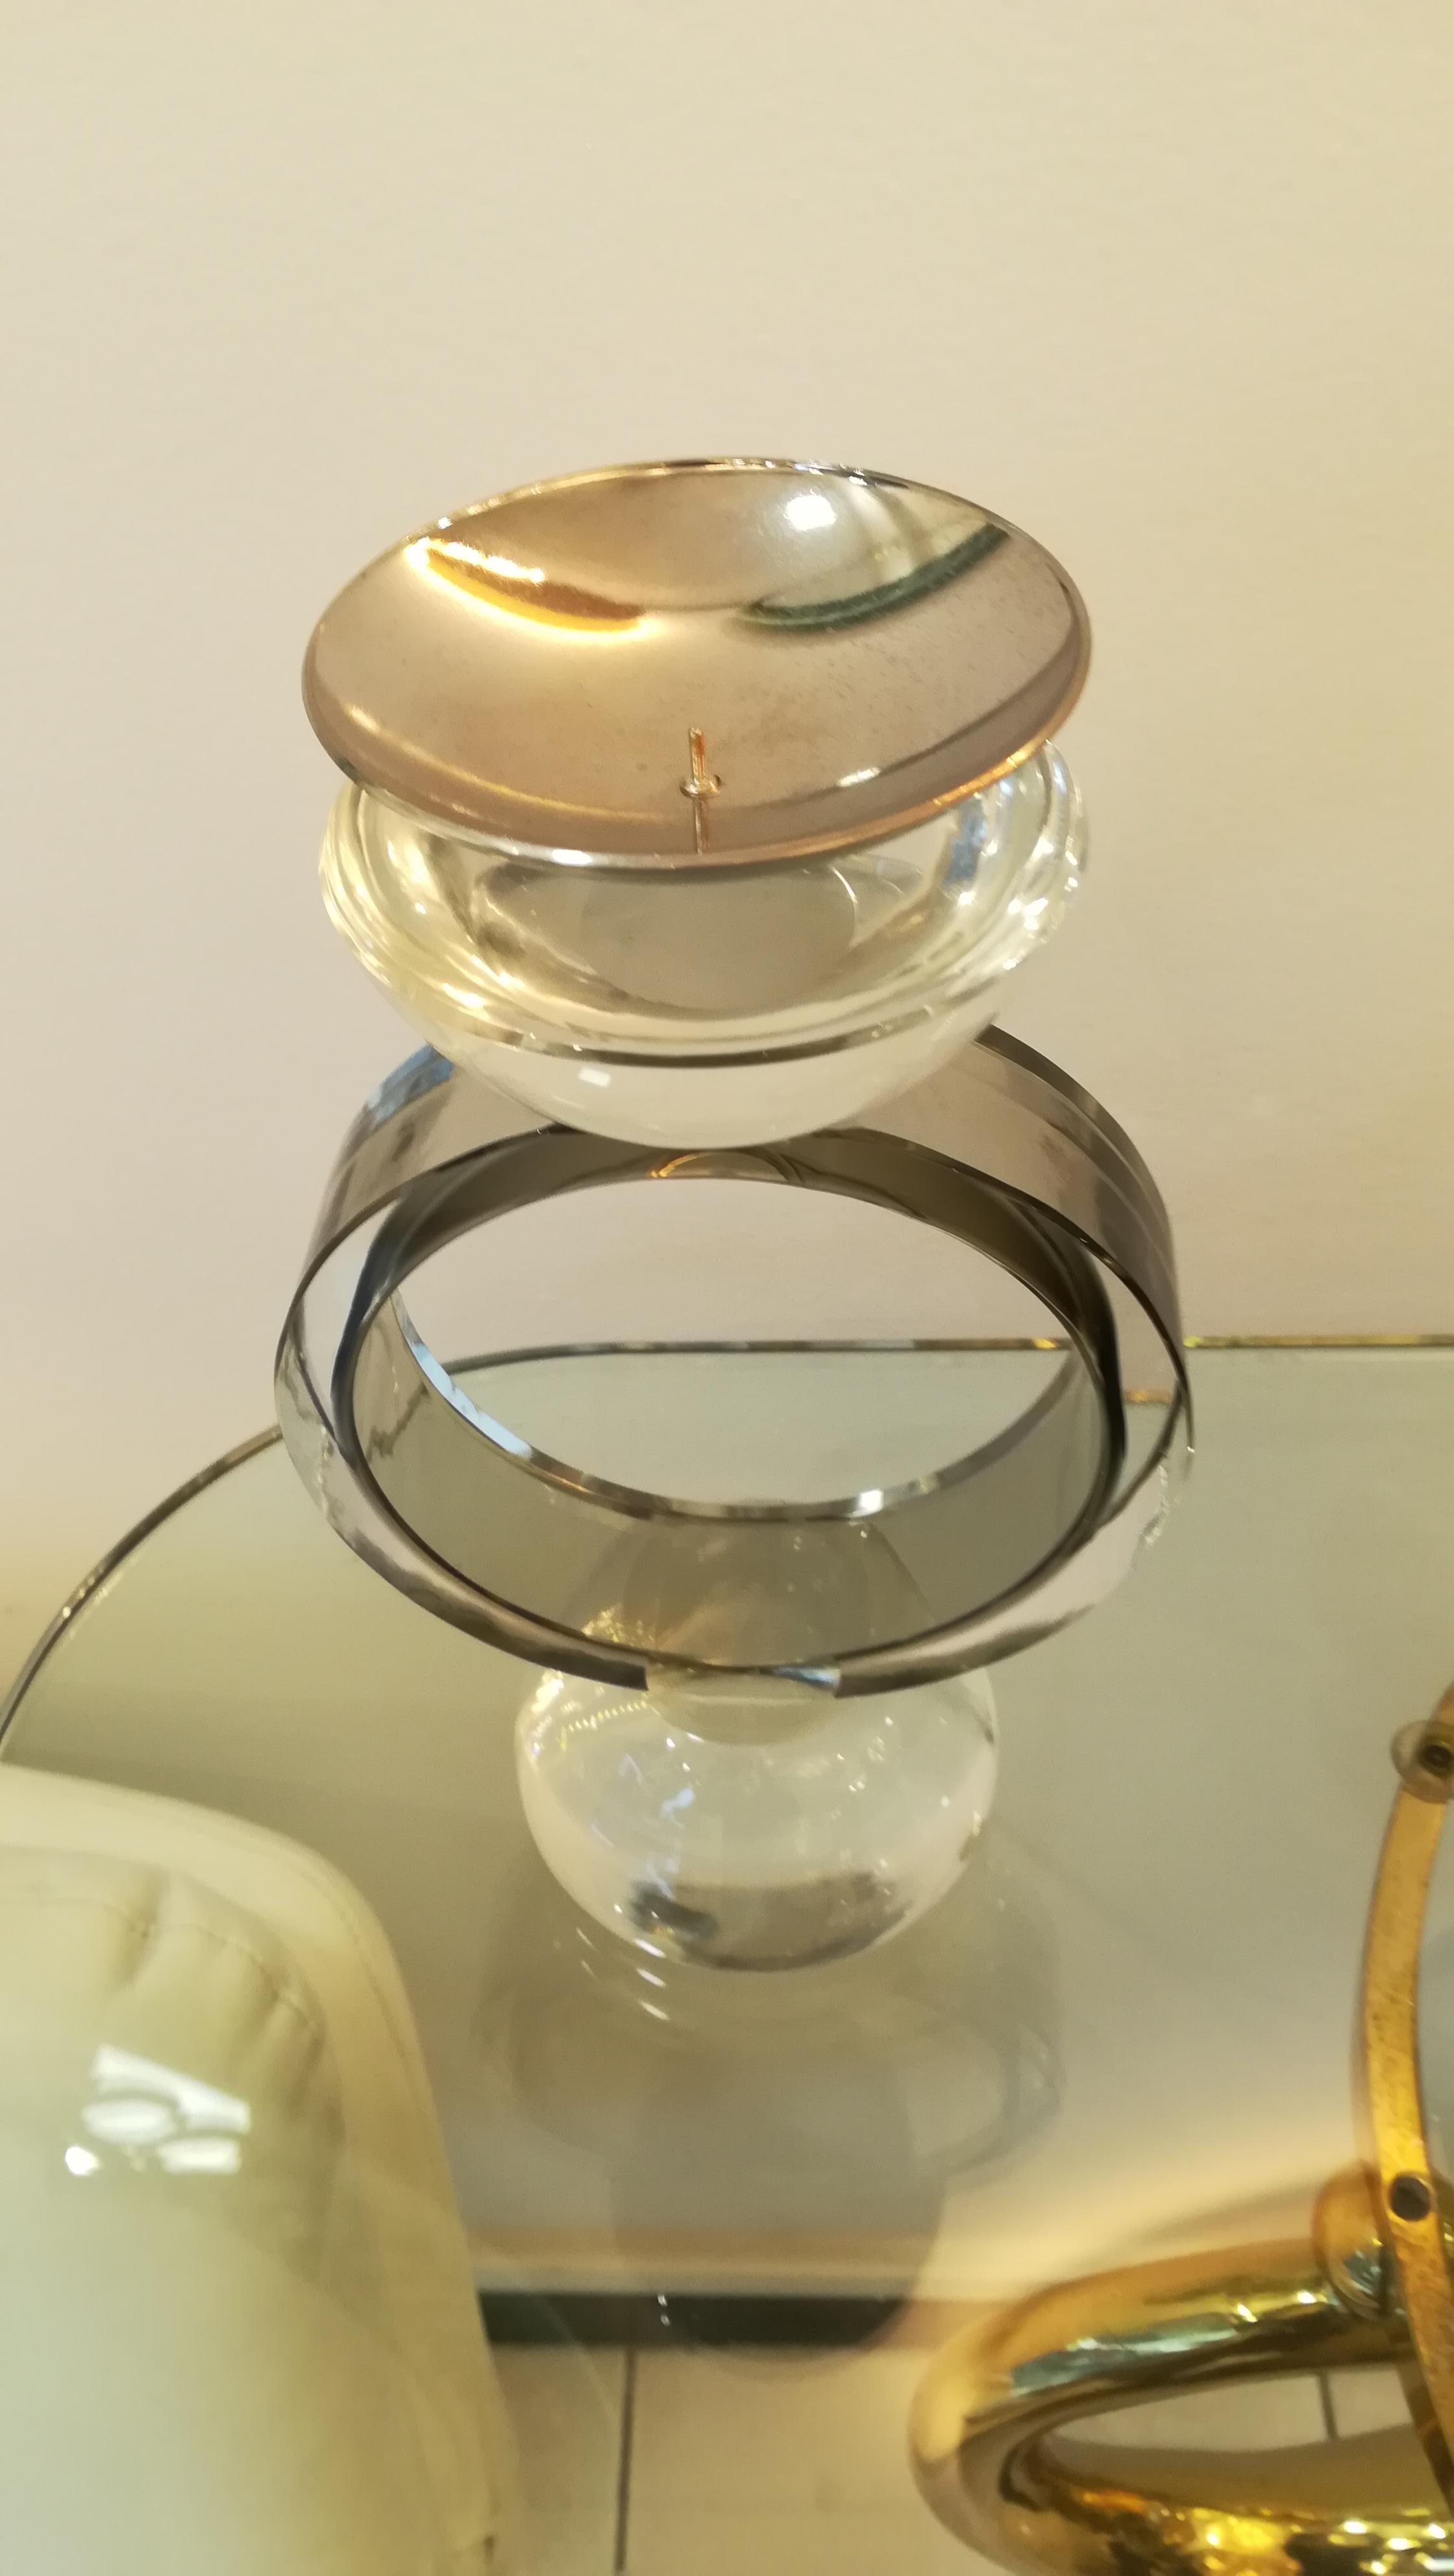 Pair of Murano glass candlesticks, transparent and light brown.
Top in chromium steel.